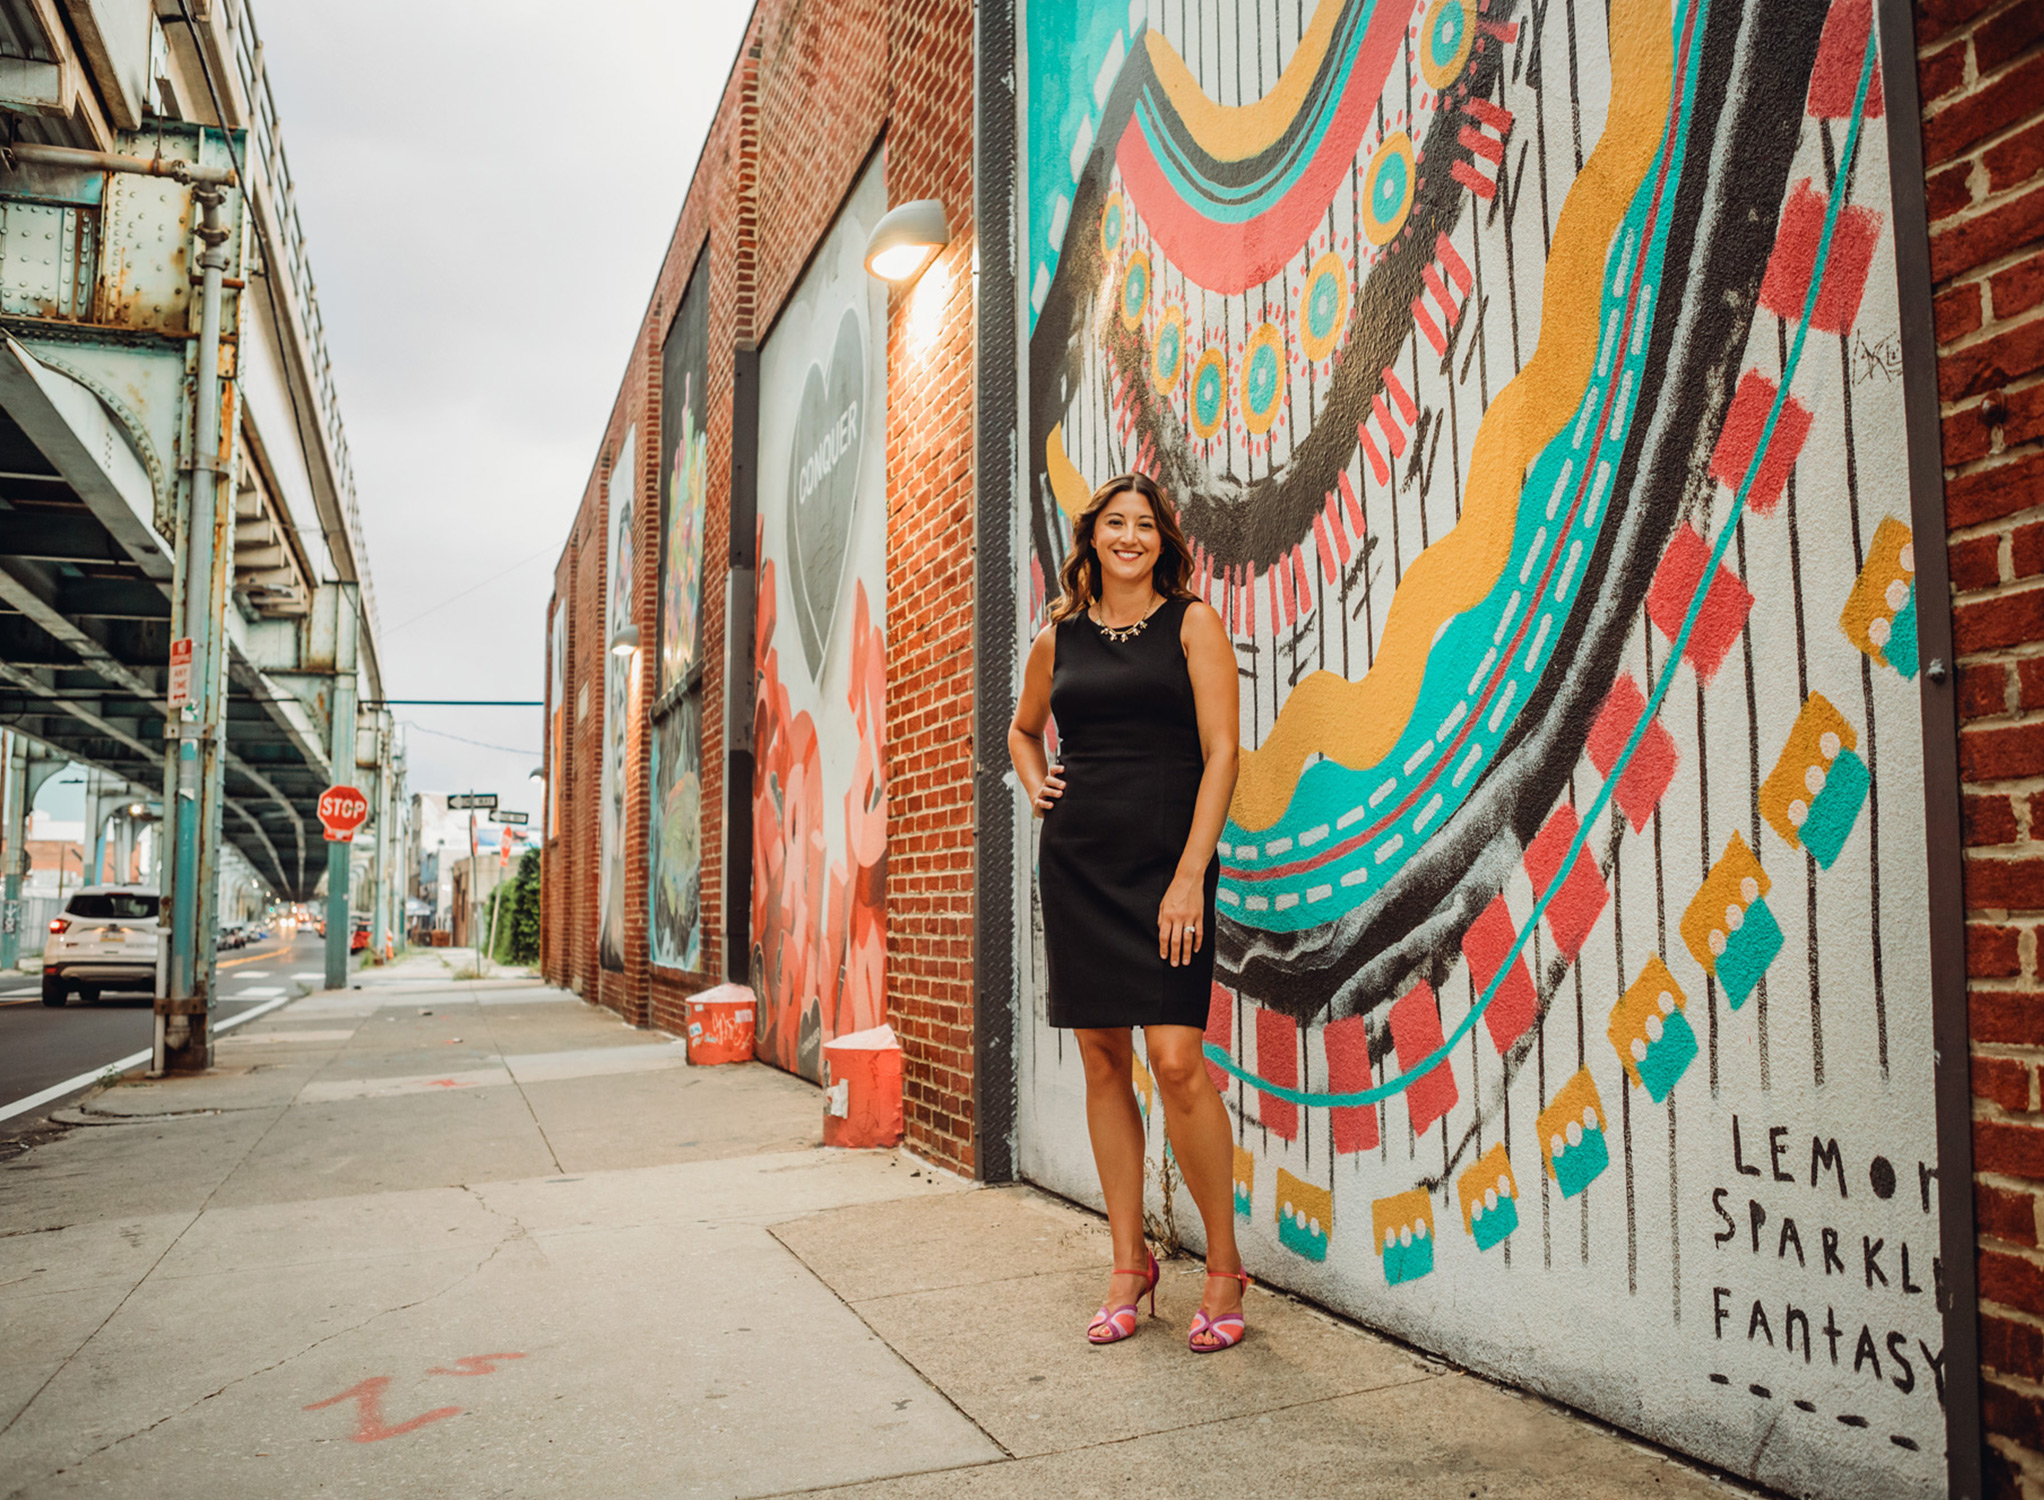 Personal branding photo of woman standing in front of Philadelphia mural